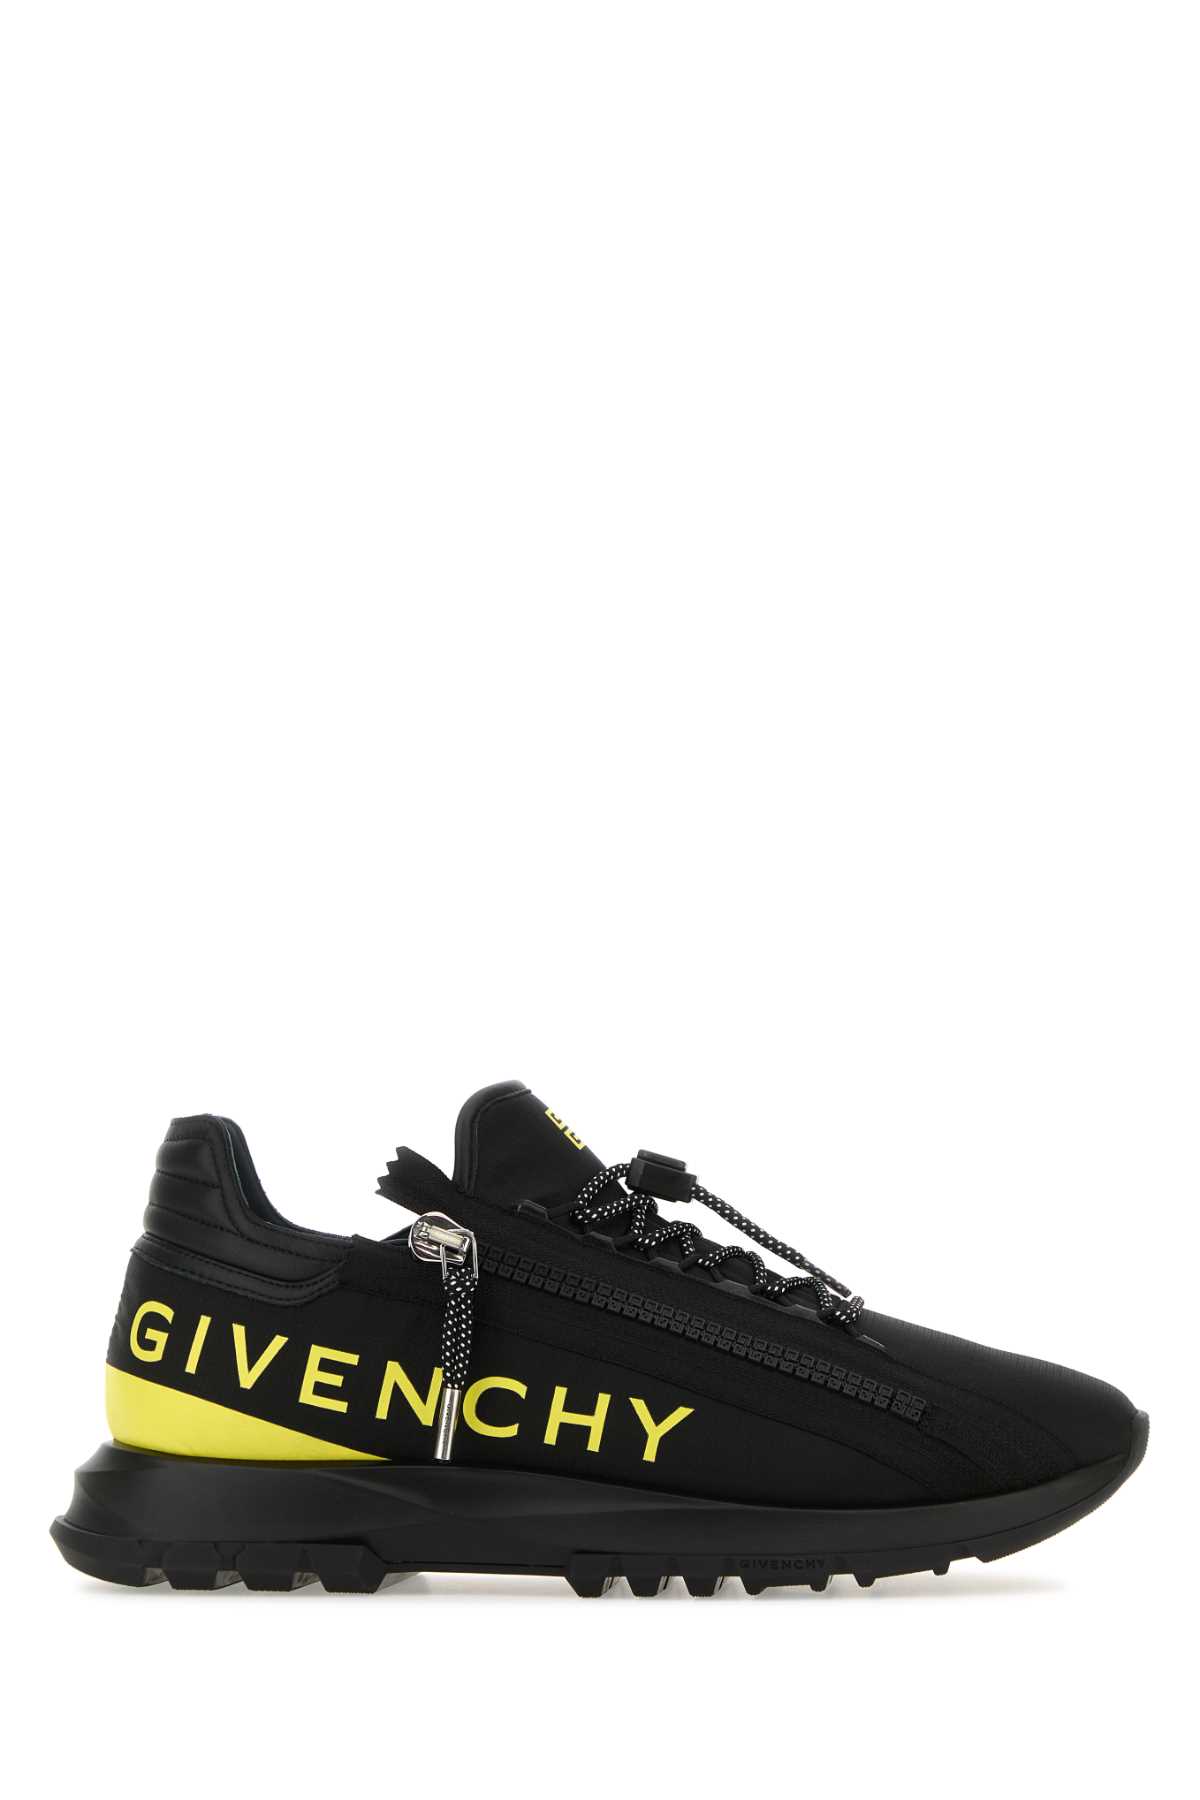 Givenchy Black Fabric Spectre Sneakers In Blackyellow